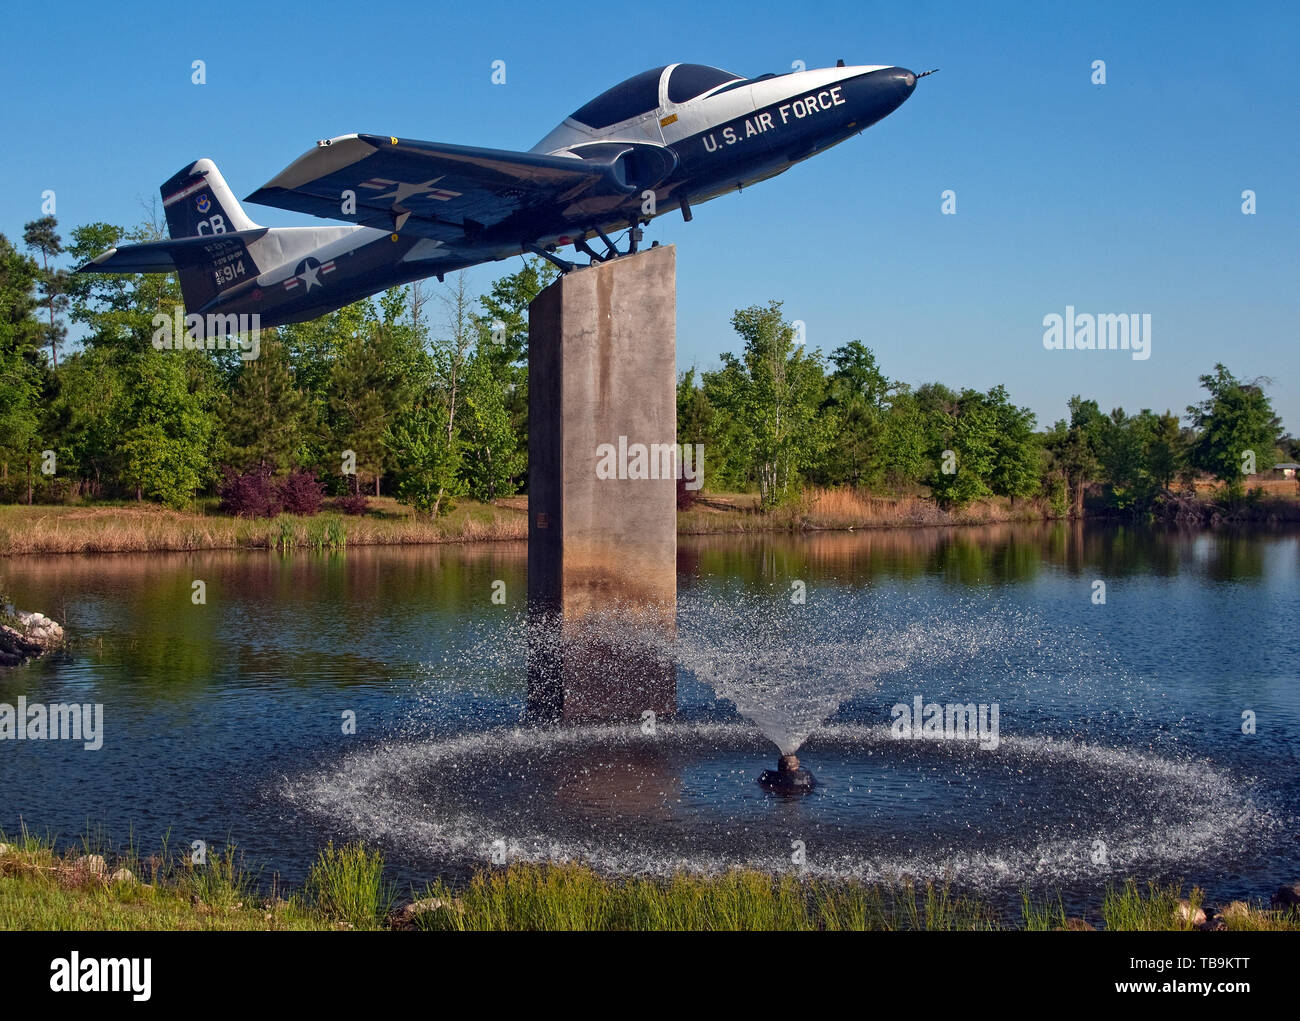 A Cessna T-37 Tweet is part of the static display at the Hwy. 45 entrance to Columbus Air Force Base in Columbus, Mississippi. Stock Photo